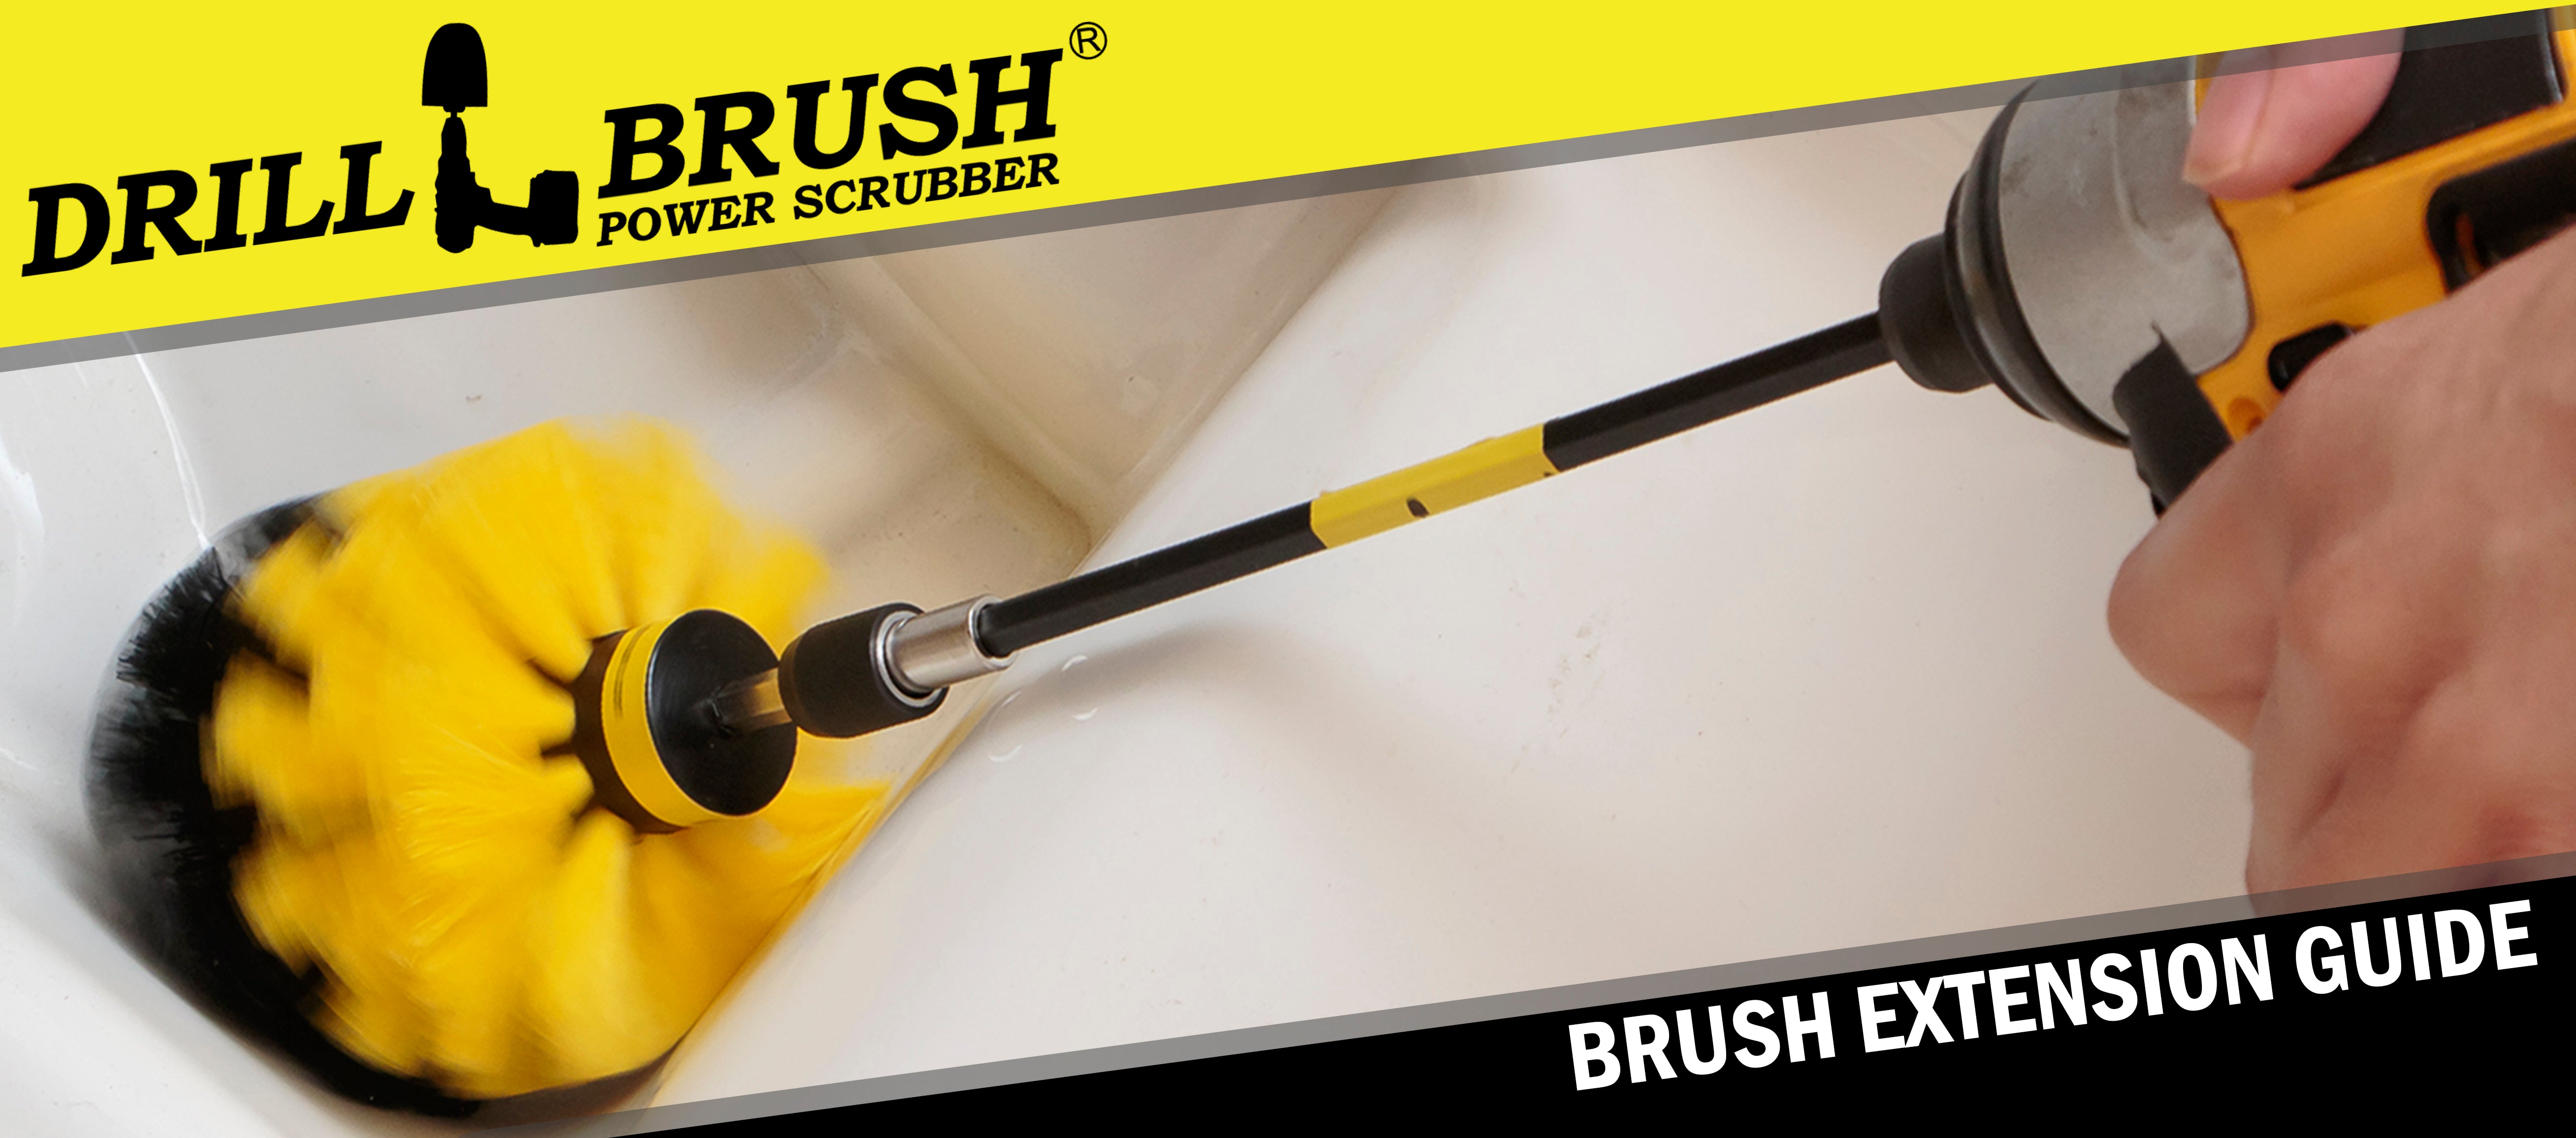 How to Install and Use a Drillbrush Extension